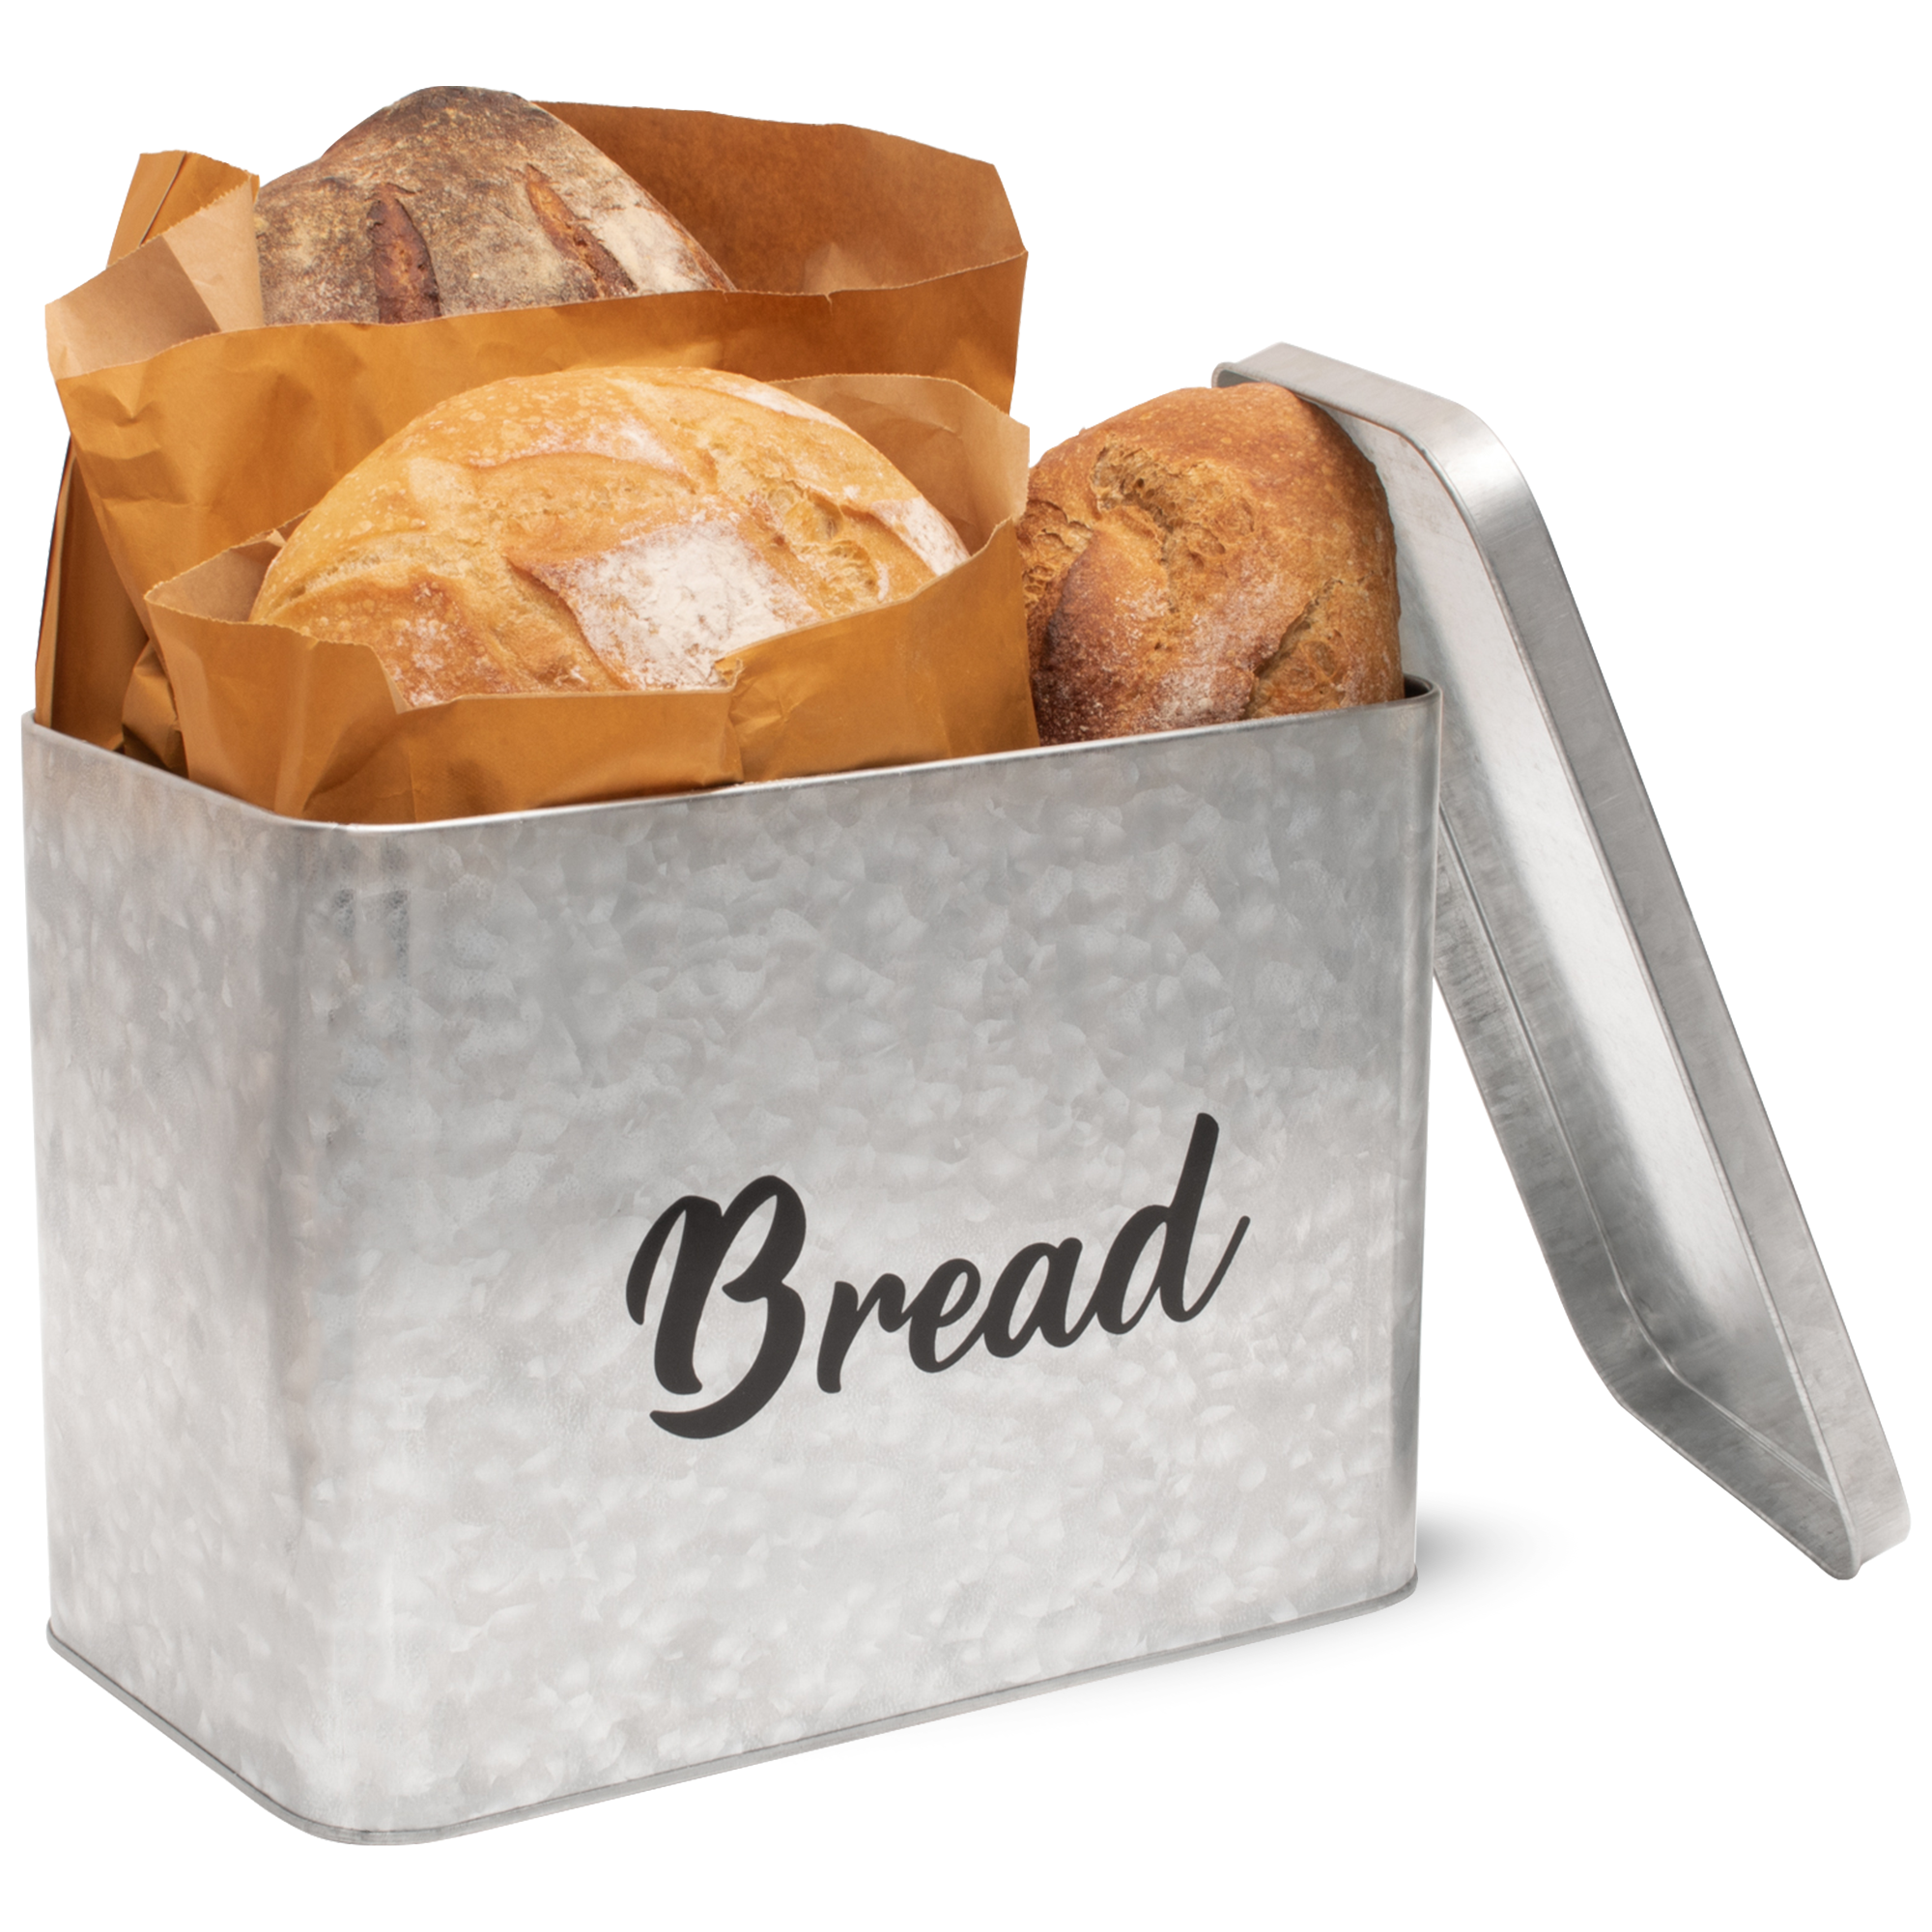 Saratoga Home Bread Box, Canisters Set of 4 and Sponge Holder